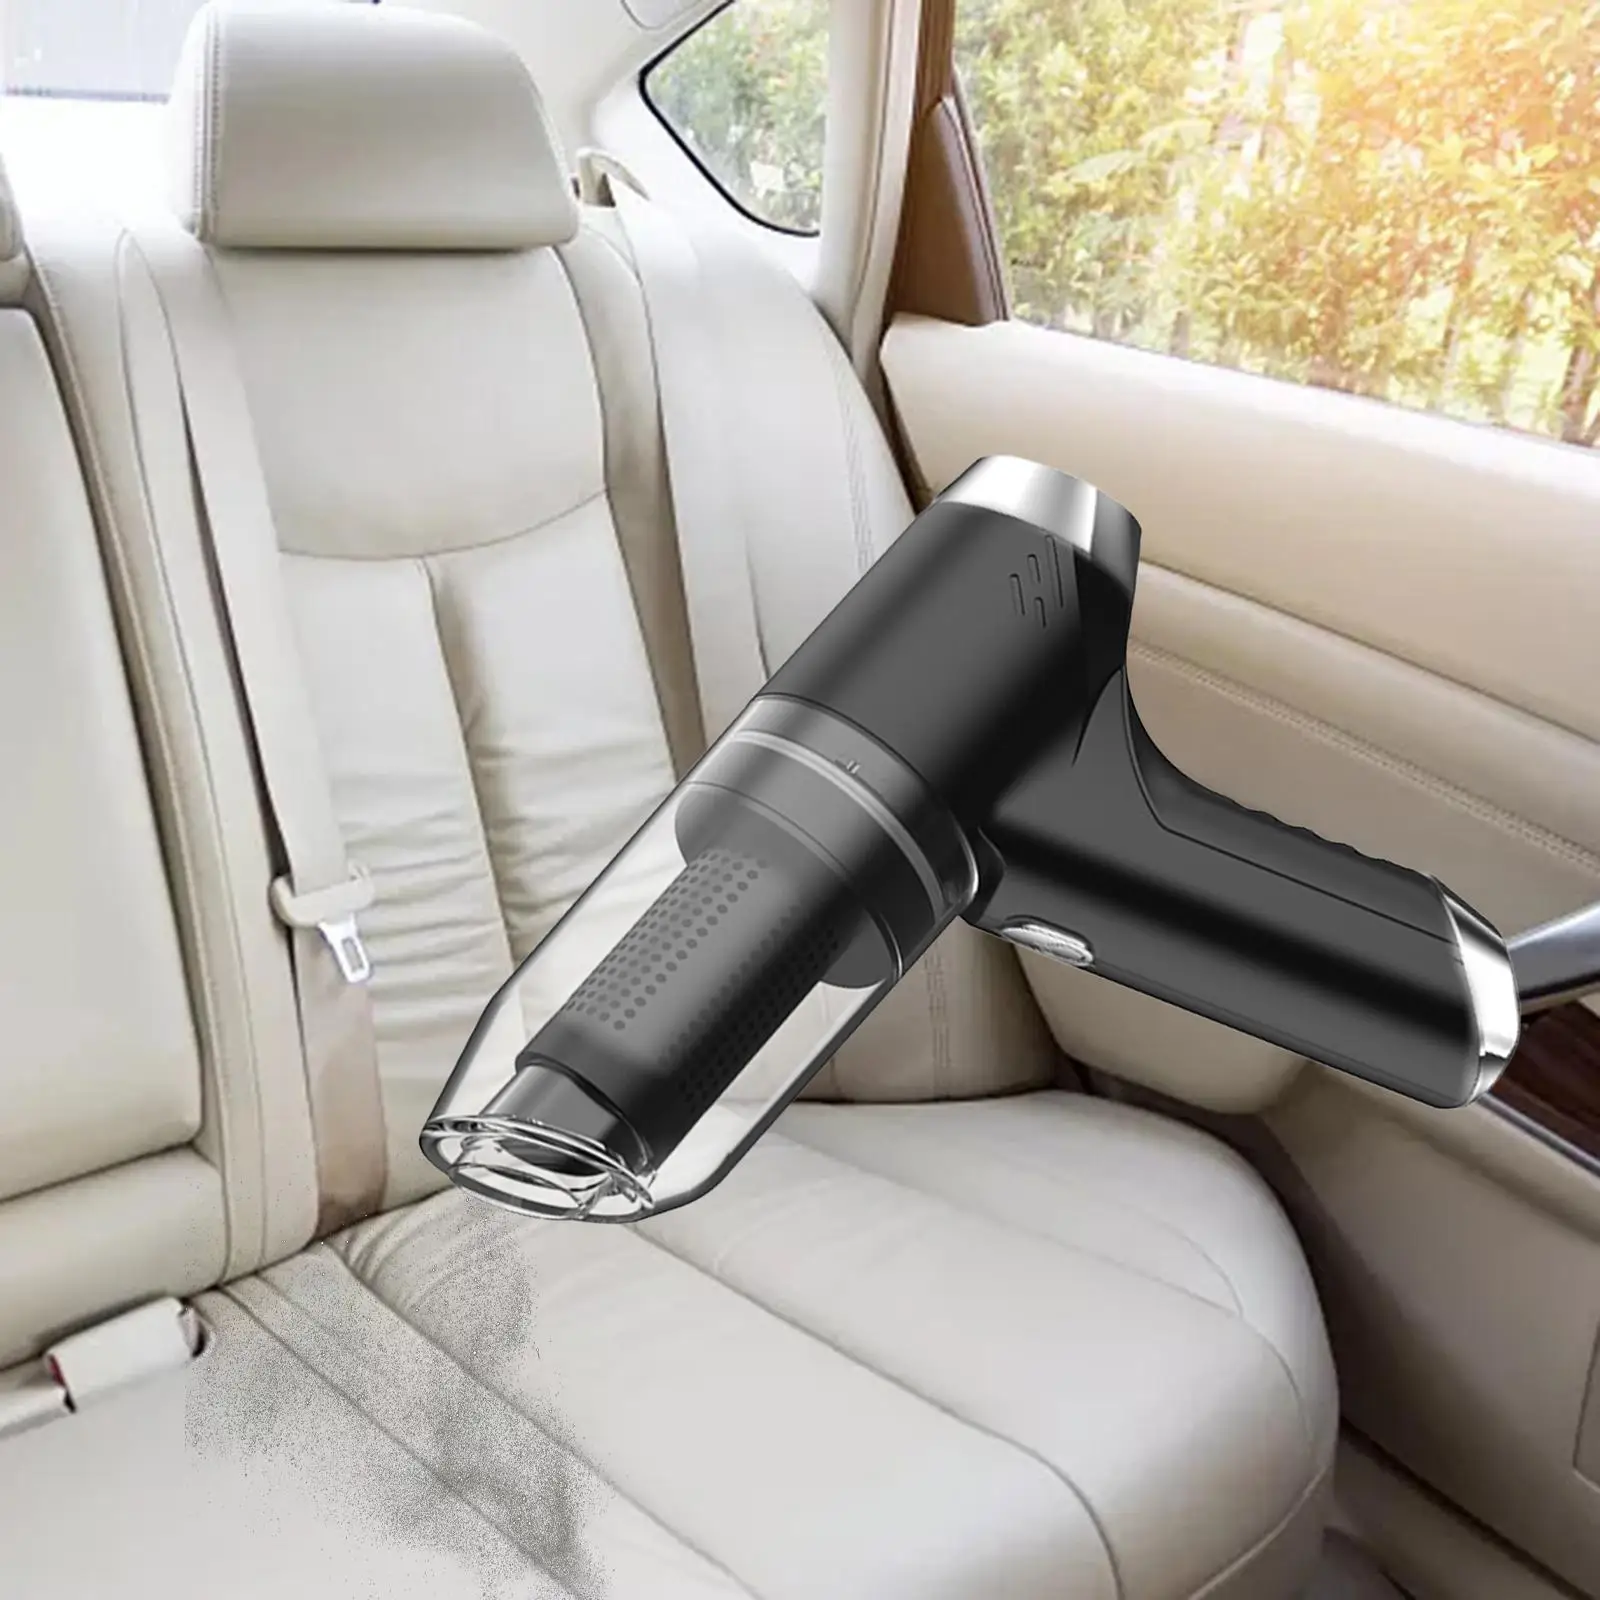 Handheld Vacuum with Nozzles Blower Automotive Accessories Lightweight Car Vacuum Cleaner for Keyboard Home Desktop car